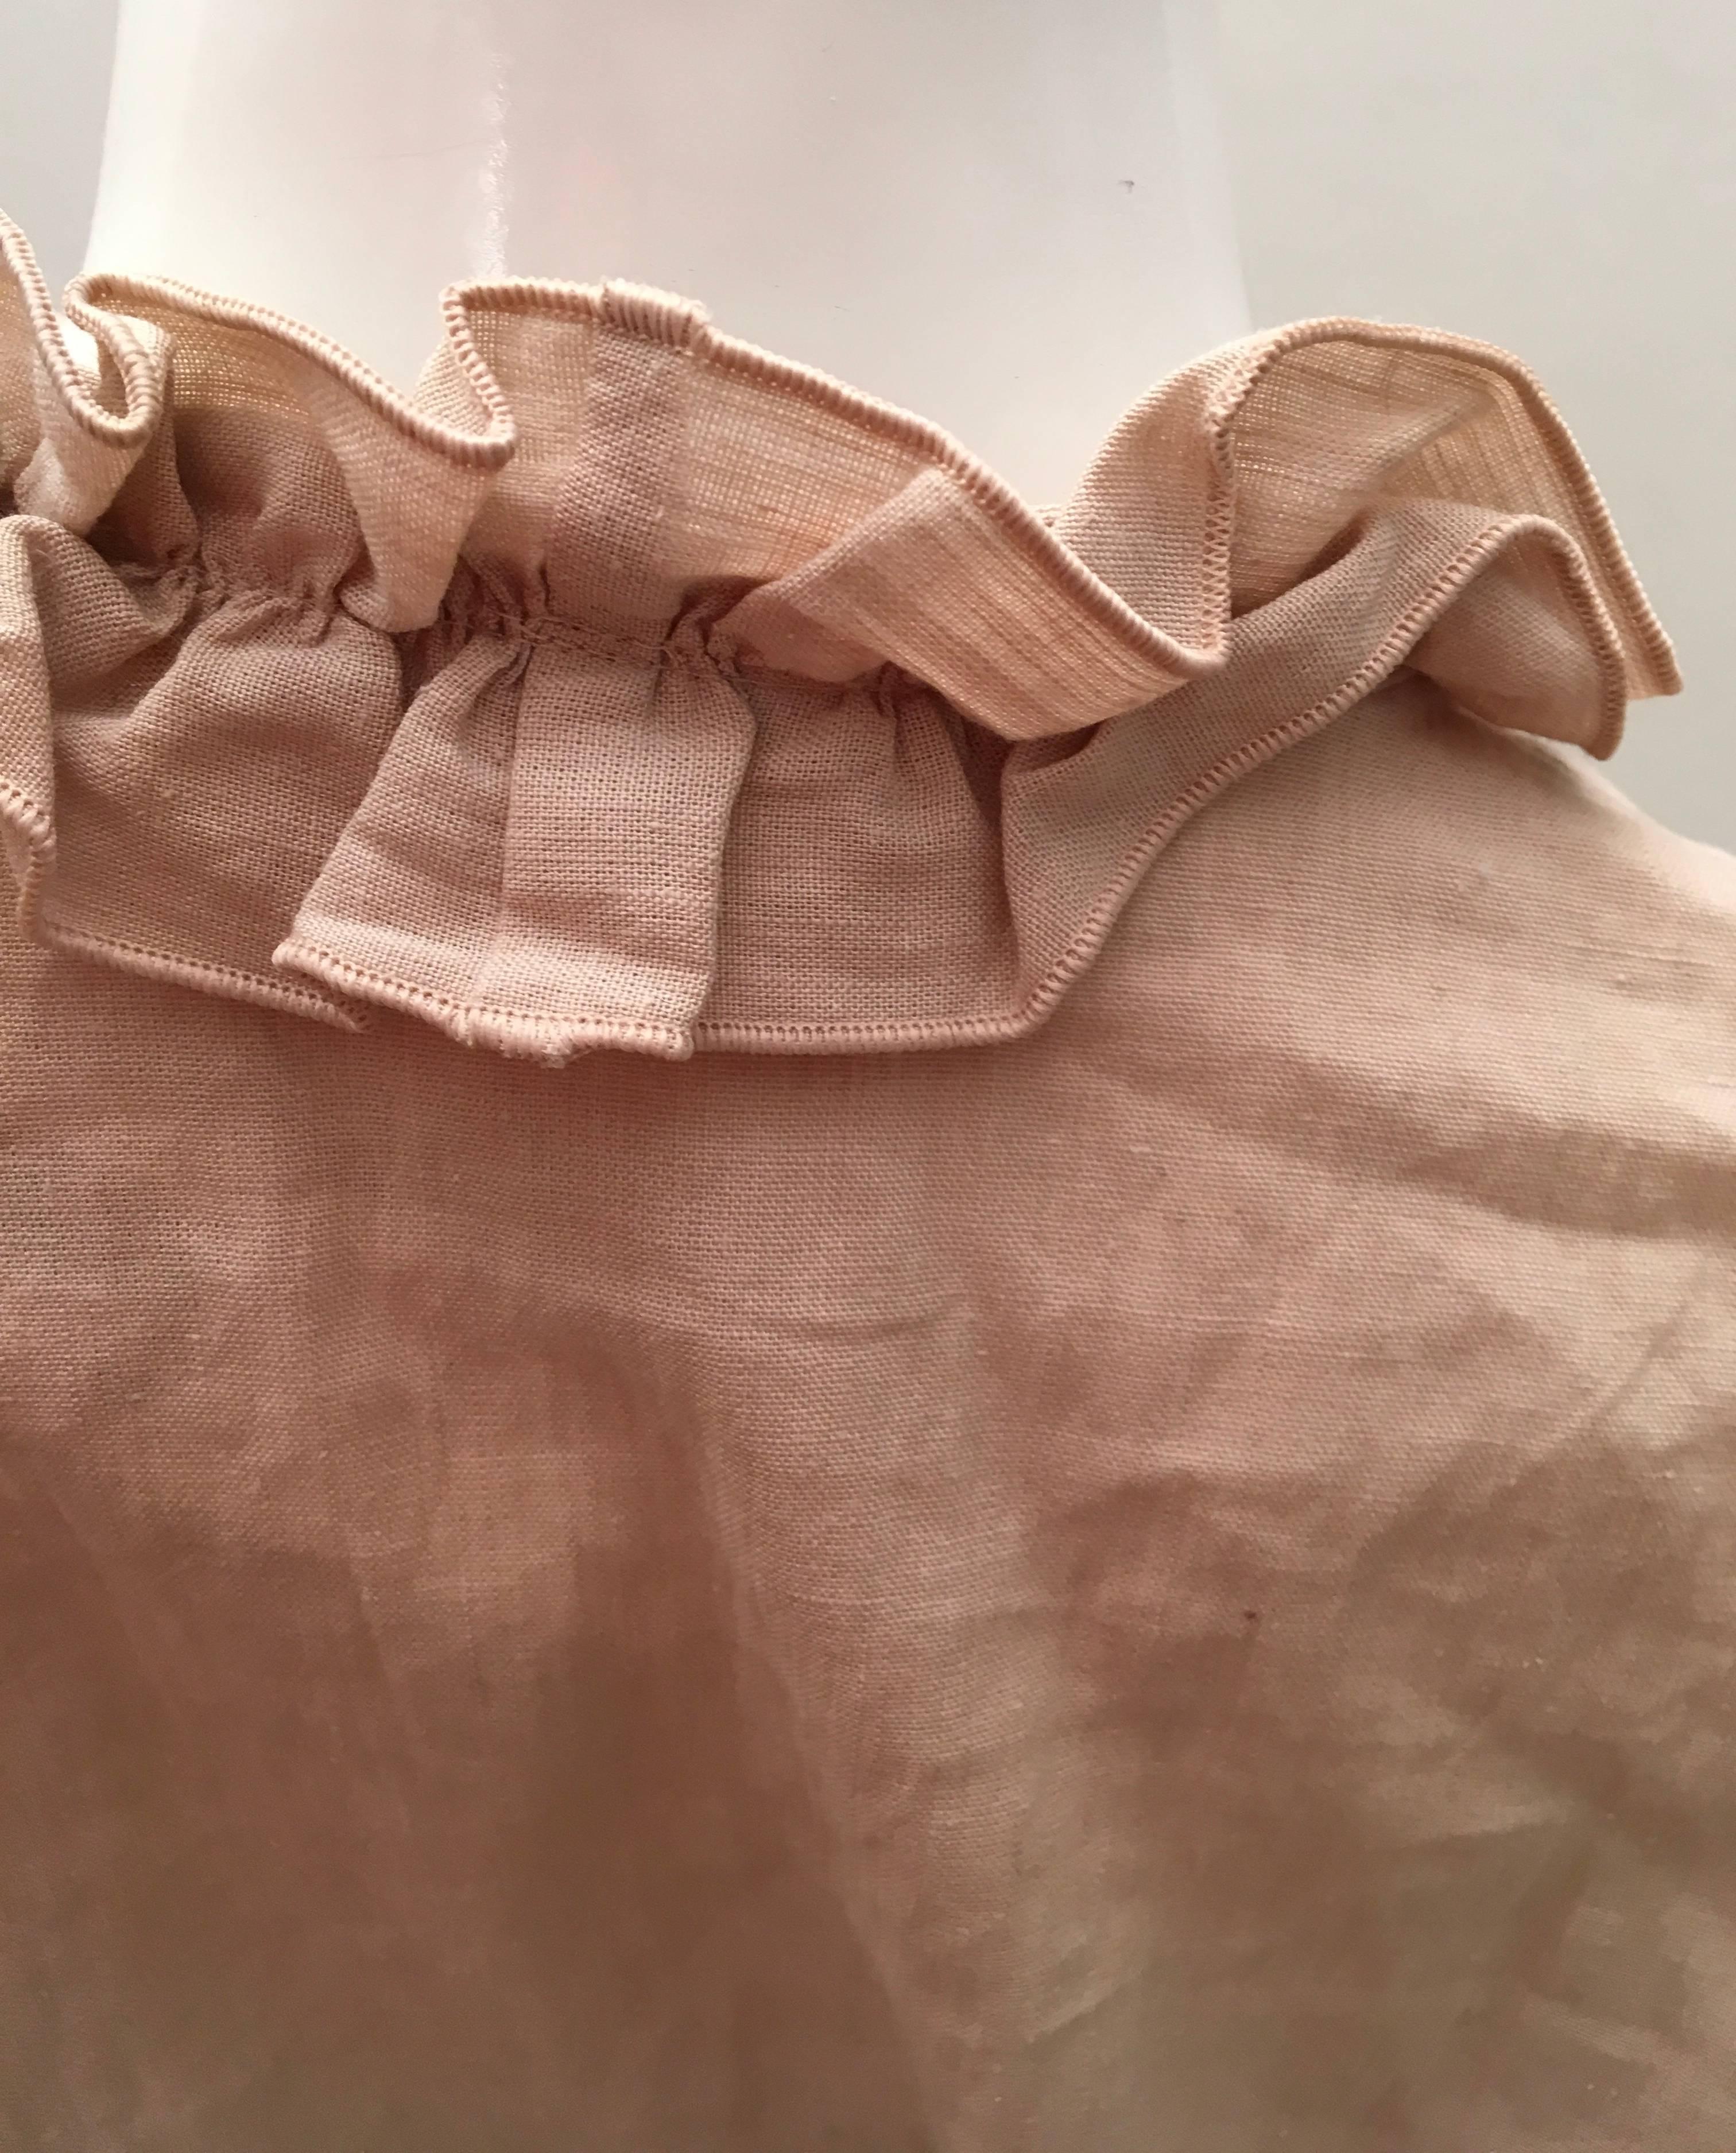 Anne Fontaine Sleevless Top - Cotton Linen In New Condition For Sale In Boca Raton, FL